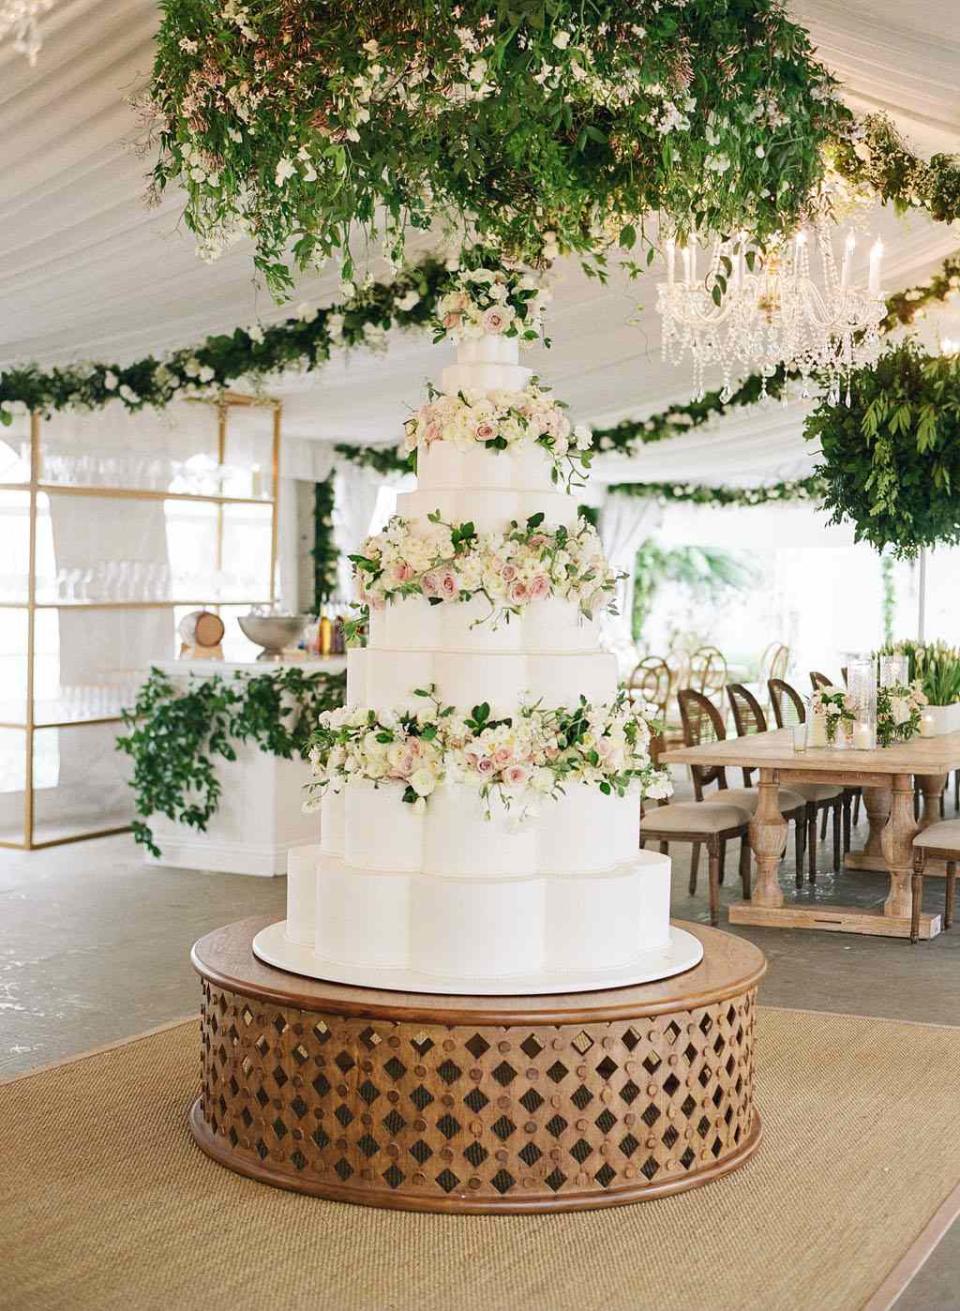 25 Over-the-Top Wedding Cakes We Can't Get Enough Of